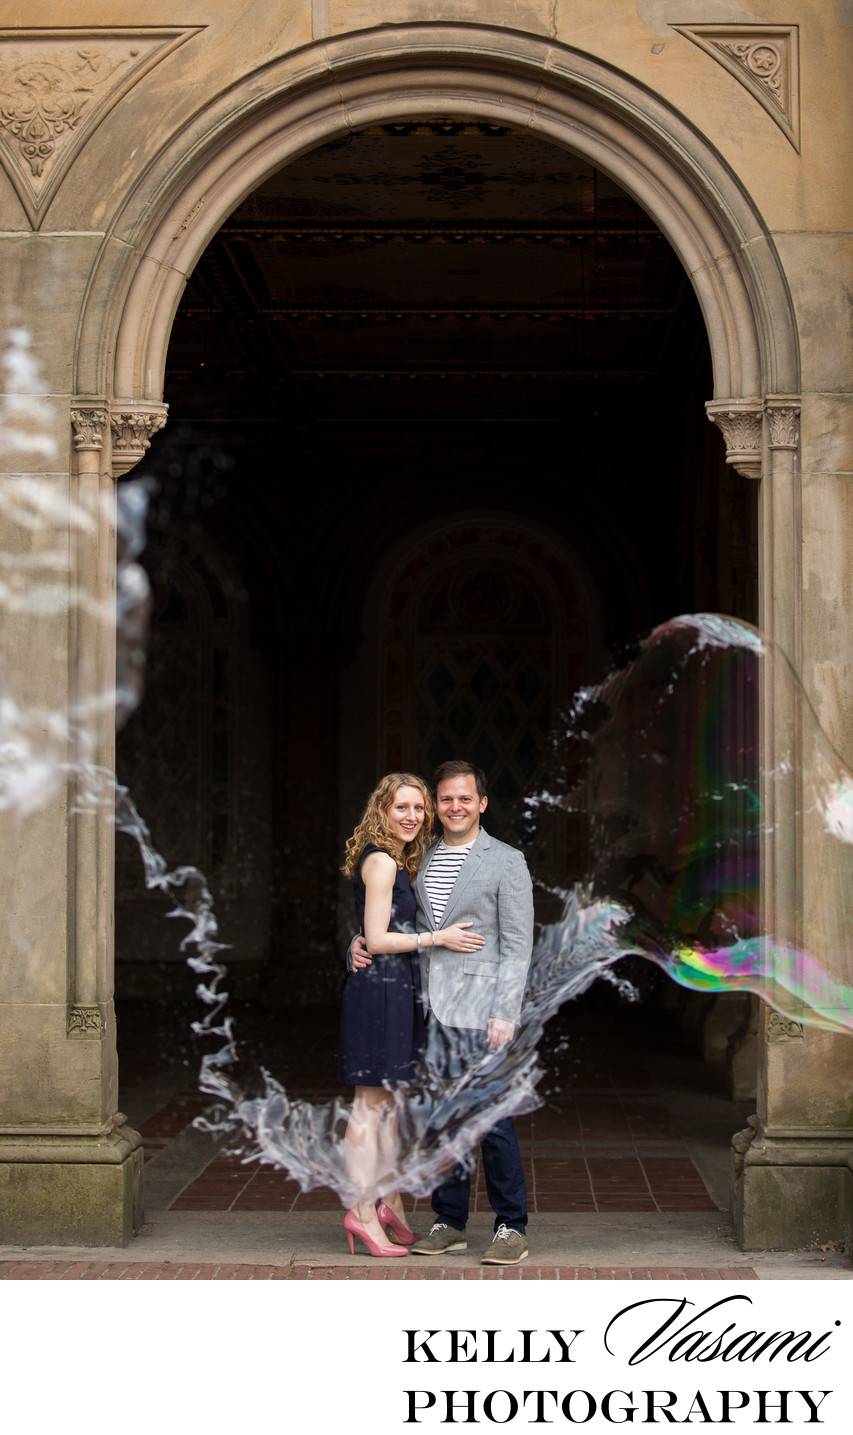 Dramatic Engagement Bubble Photo in Central Park